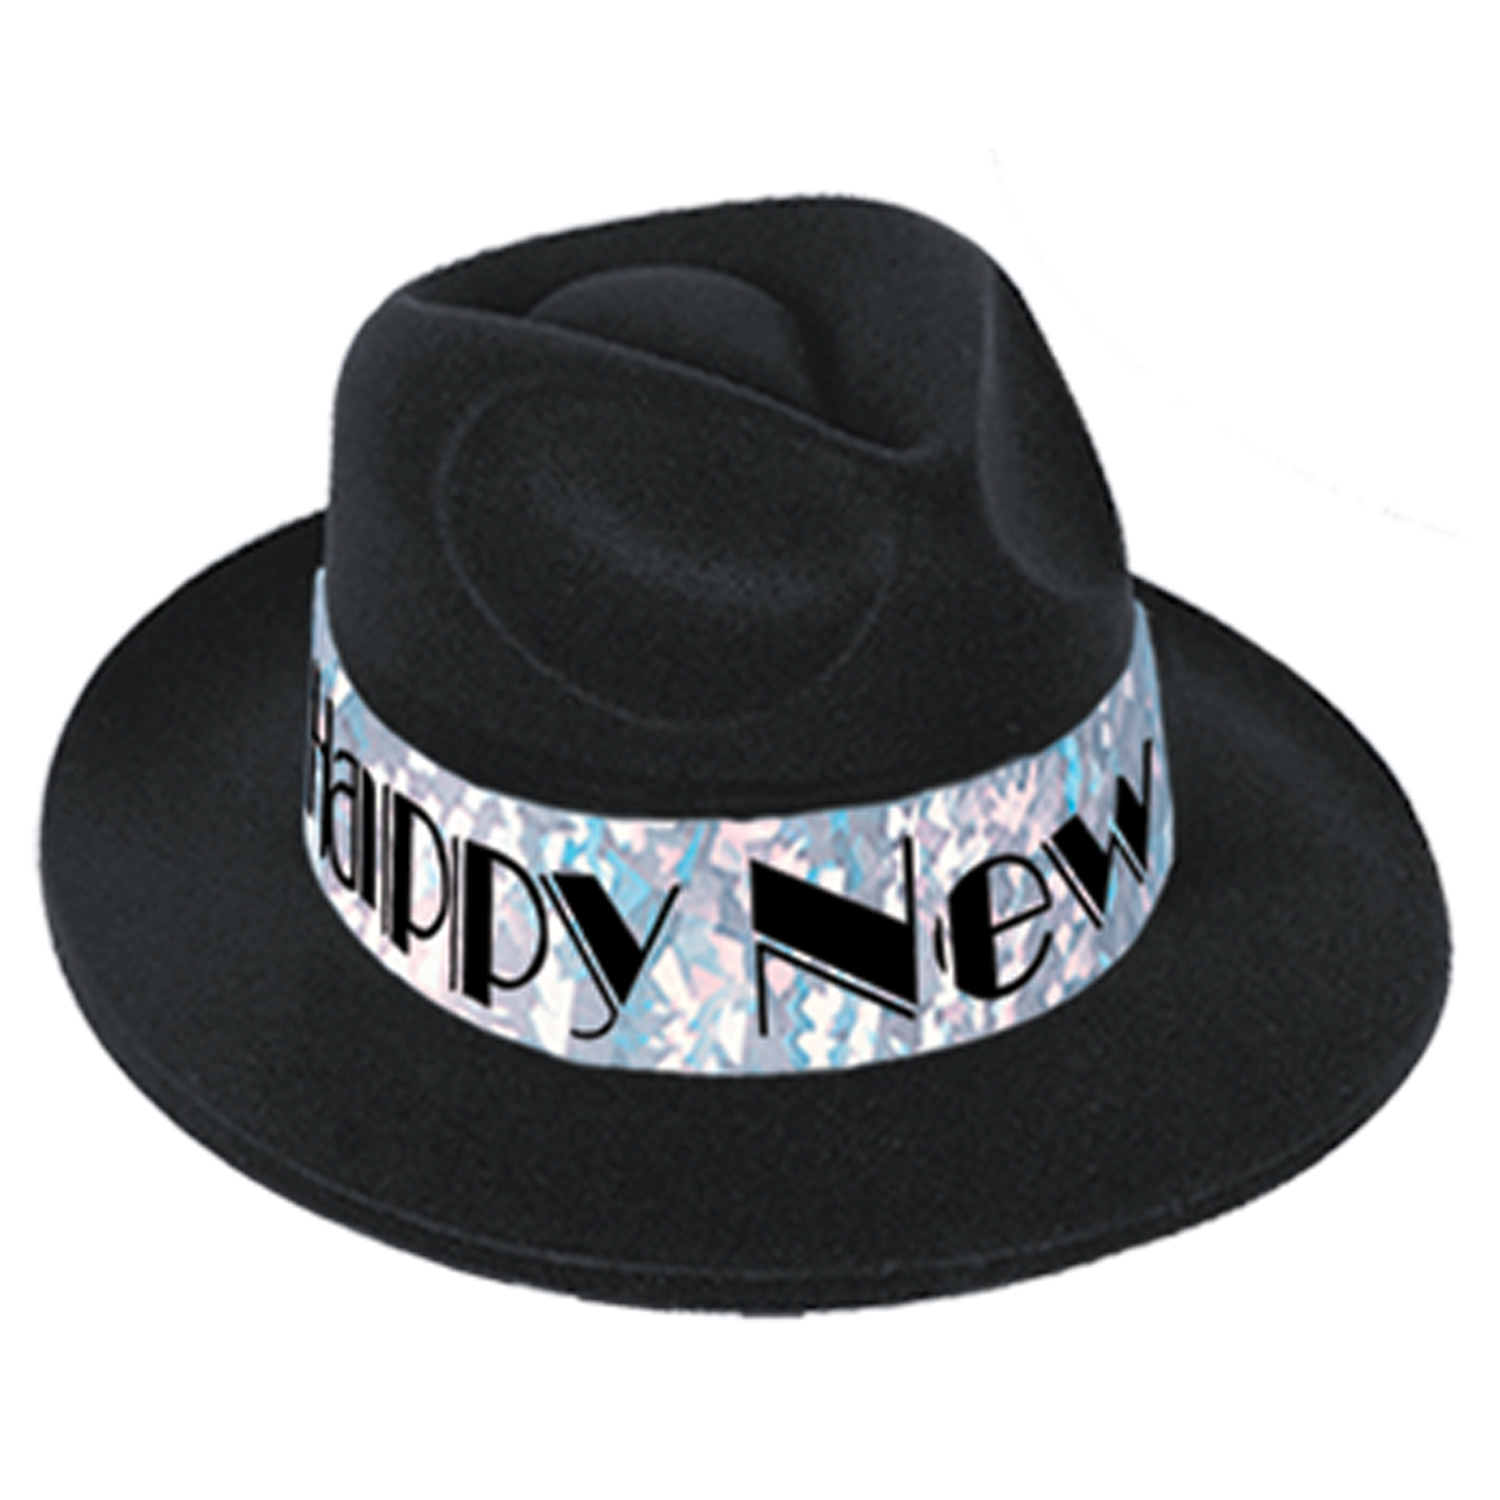 Black fedora with velour coating and a silver prismatic band that reads "Happy New Year".